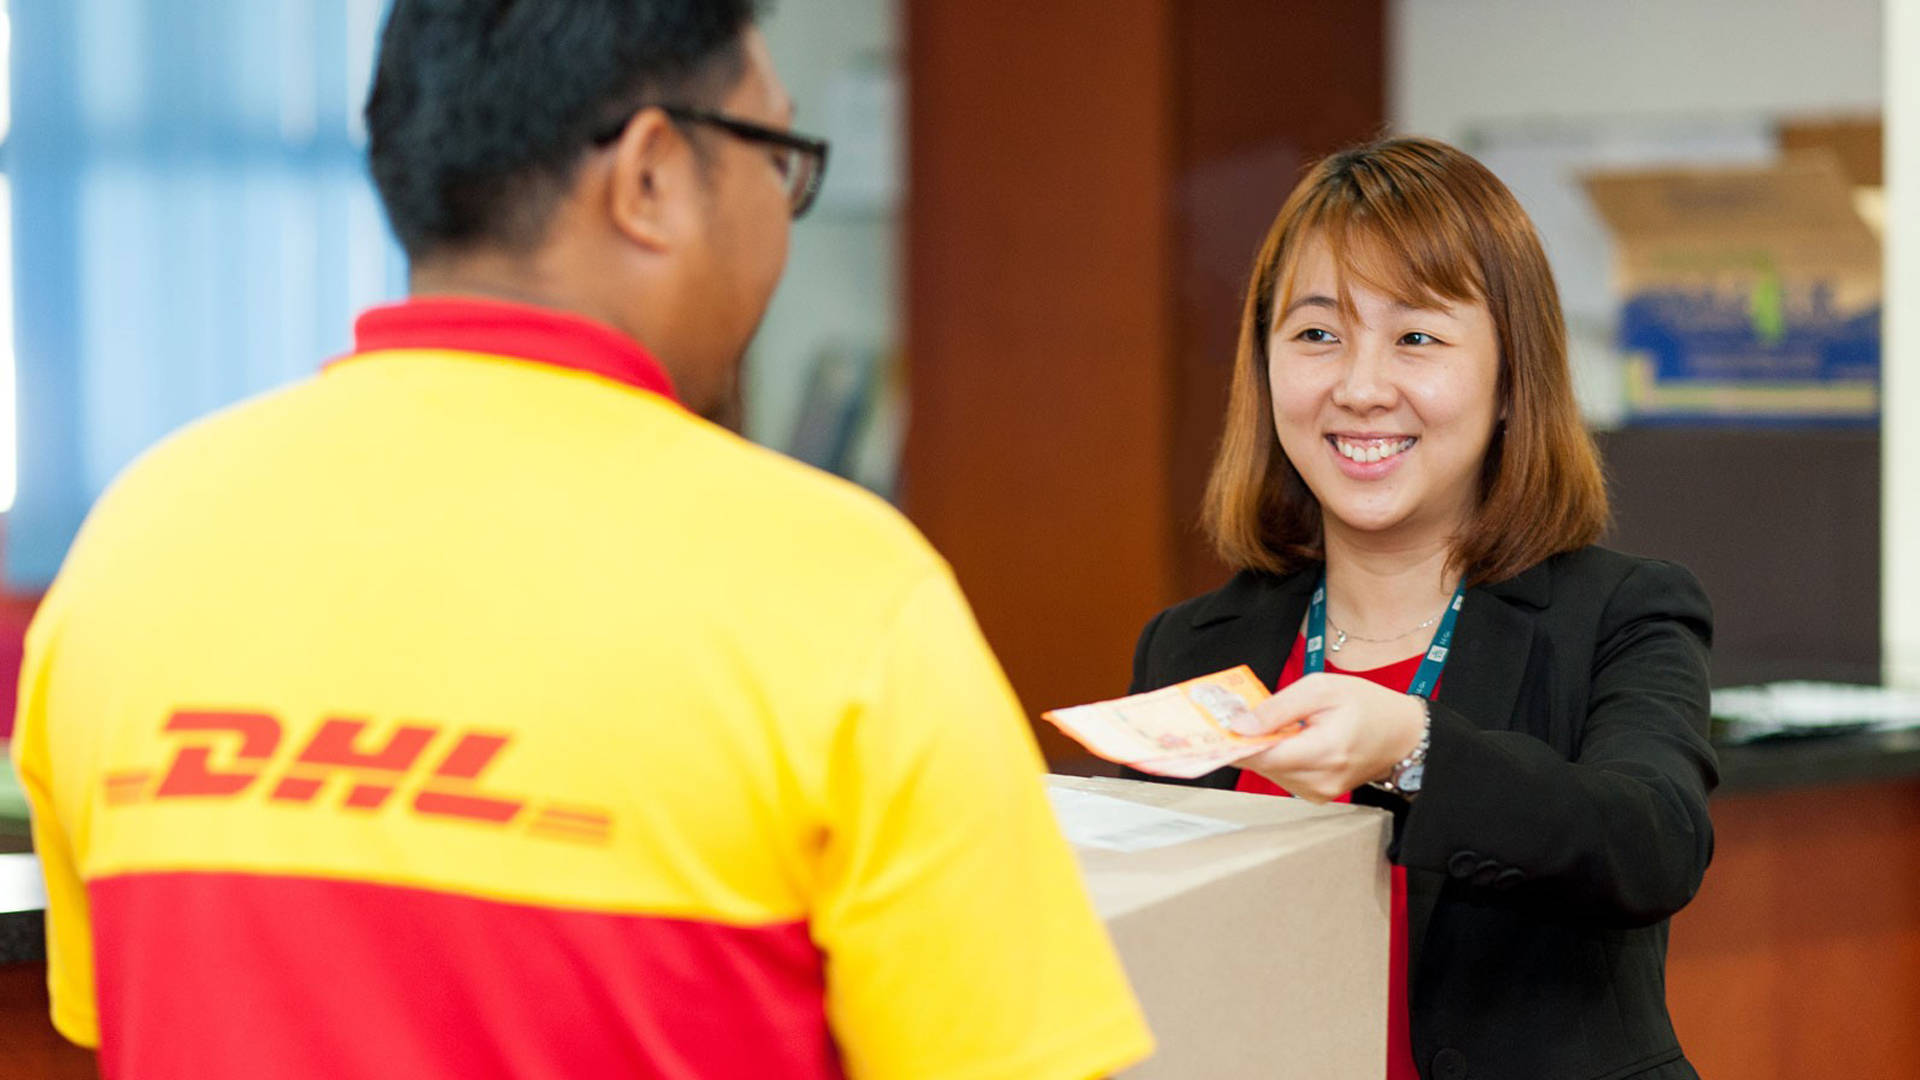 Fast Dhl Delivery Boy Wallpaper